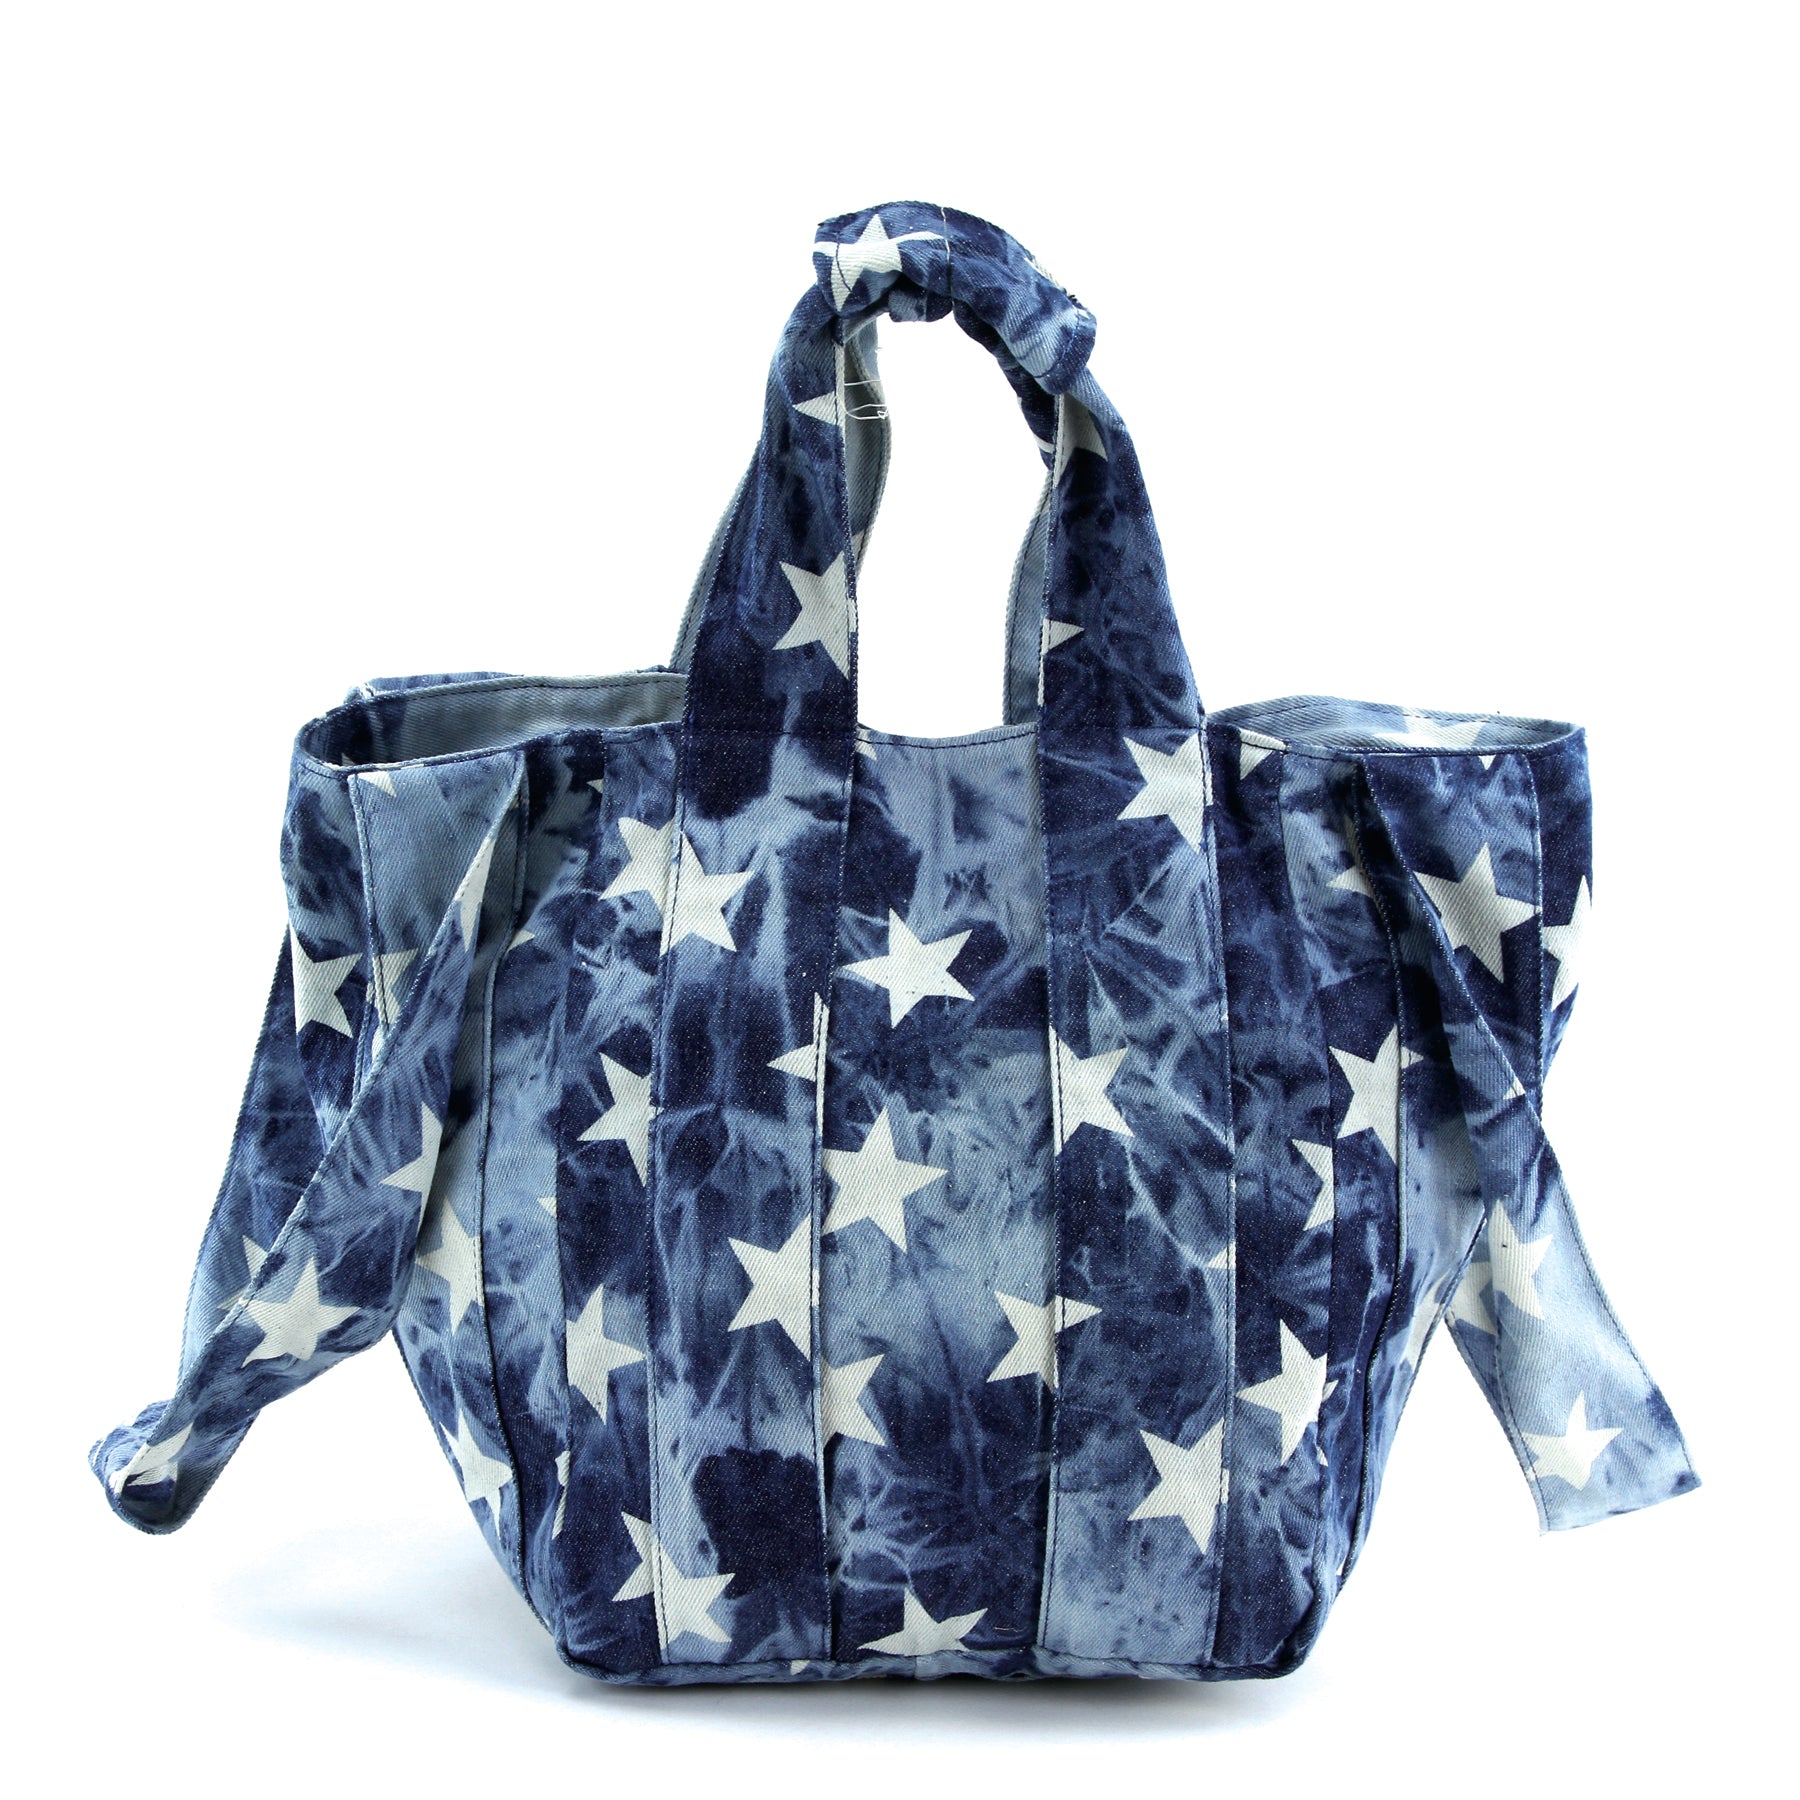 Dual Handle Tote Bag in Canvas Material front view